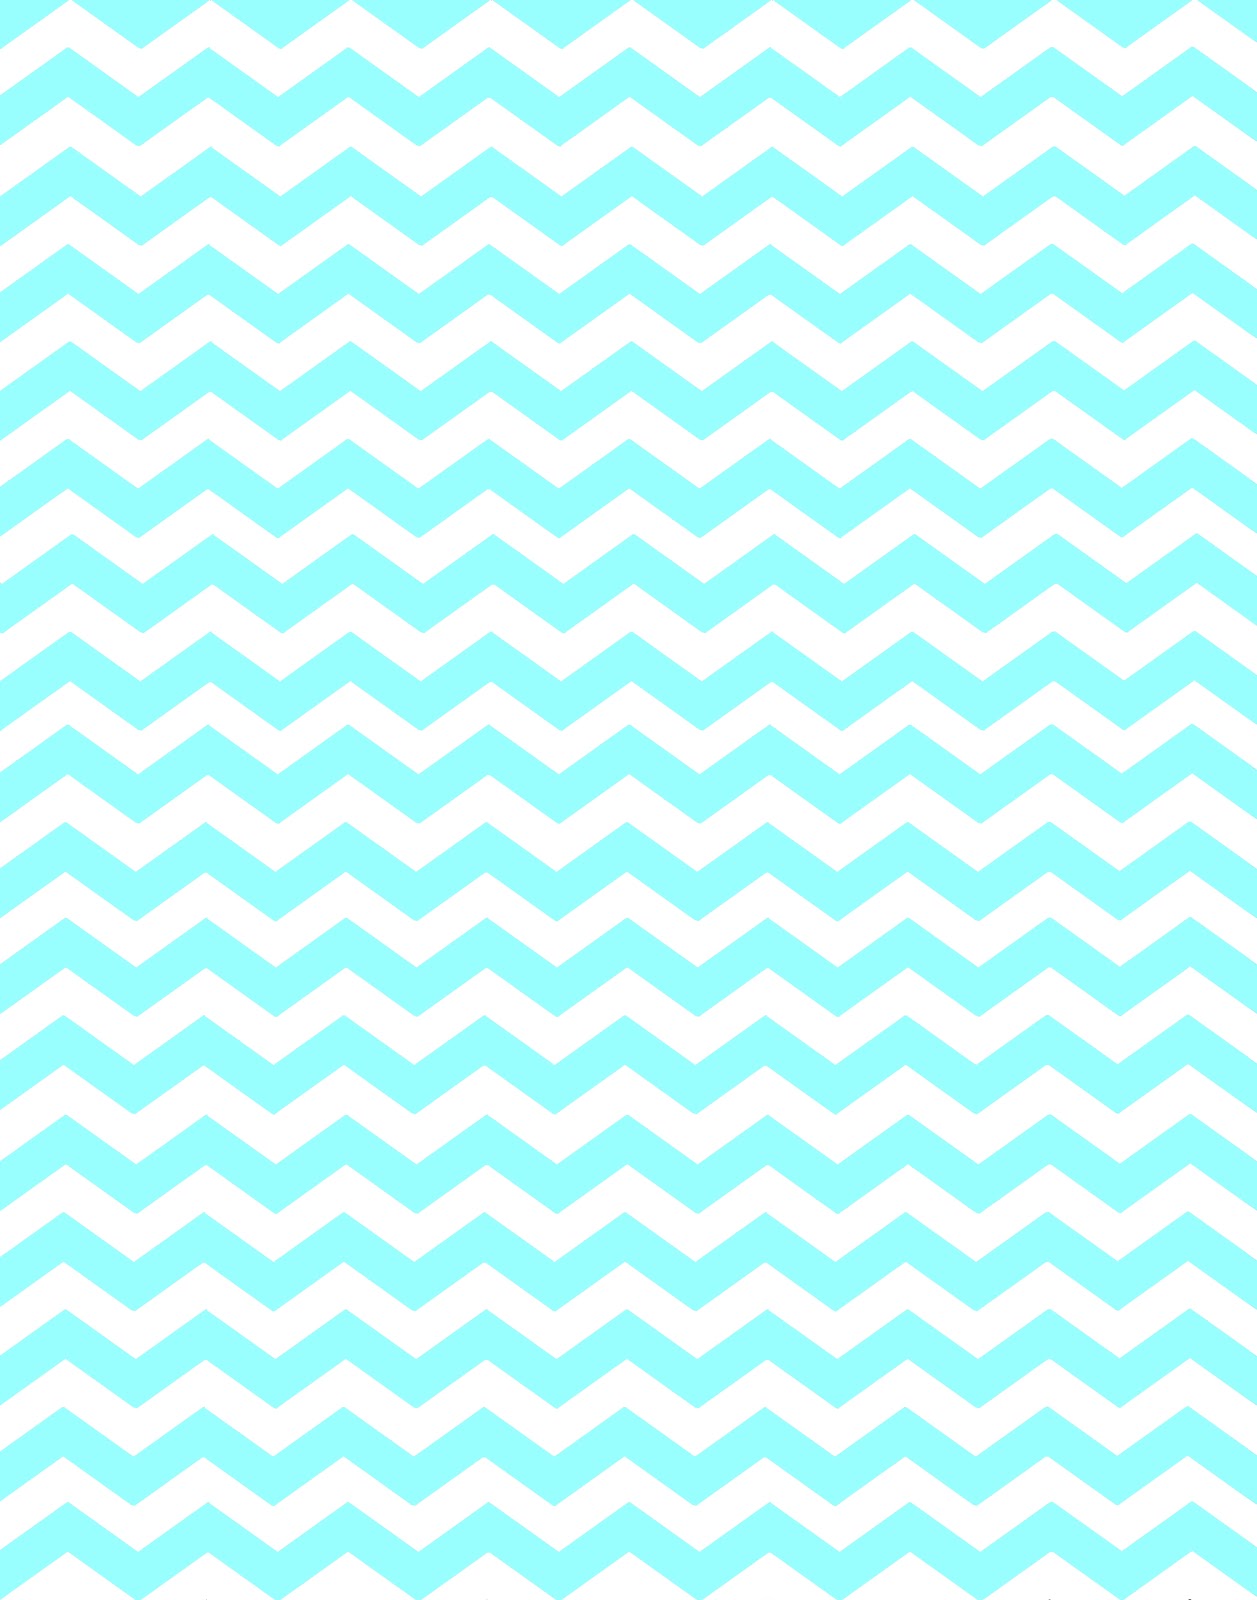 How Do You Mint Here S Chevrons In Shades Which Call